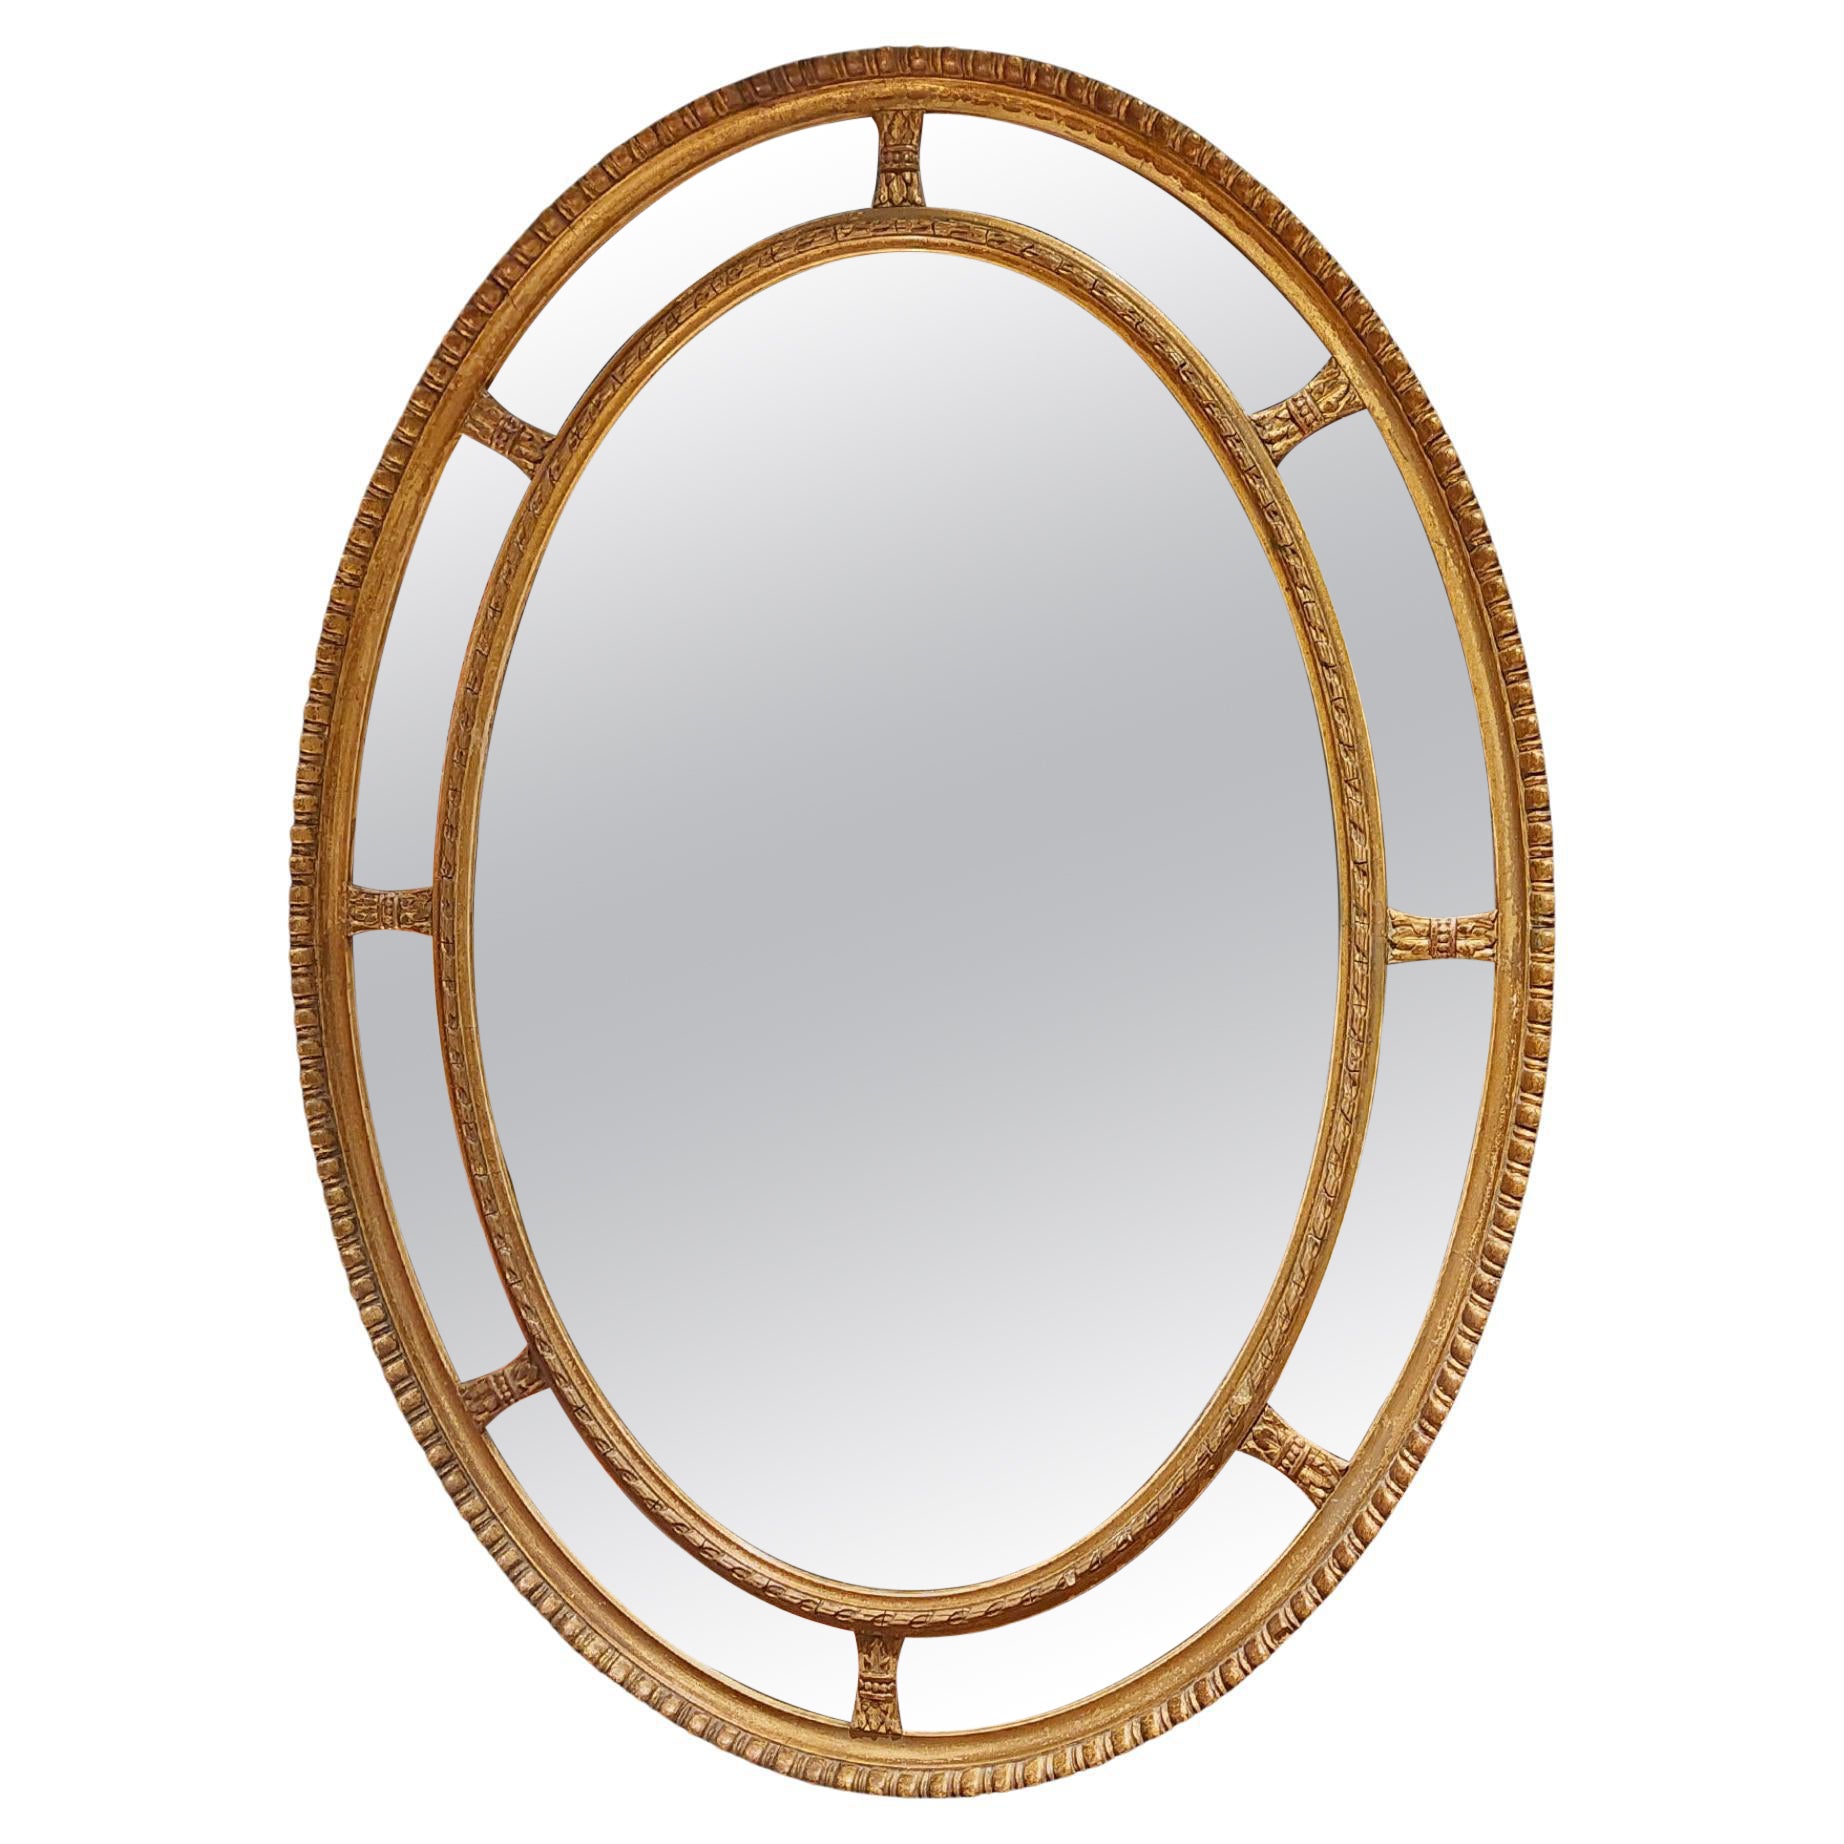 Victorian Giltwood & Gesso Oval Wall Mirror